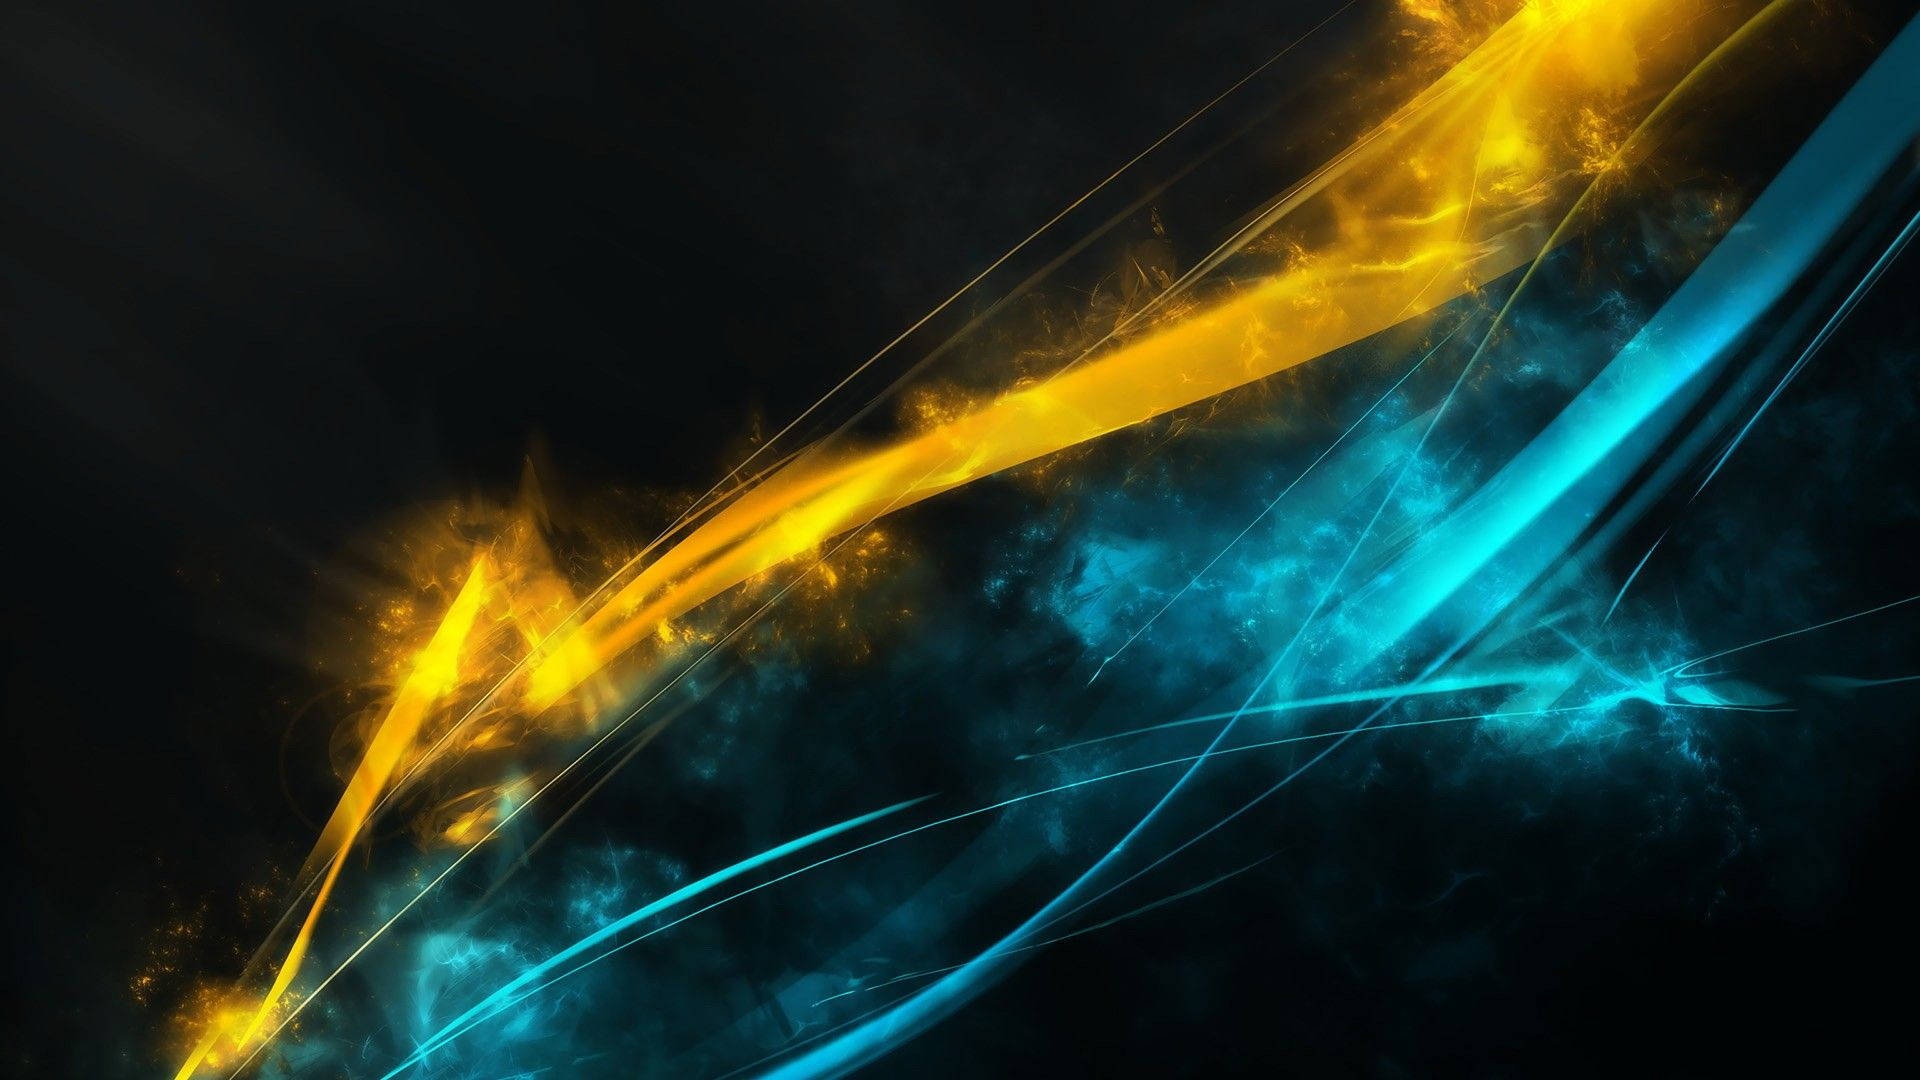 Abstract Background Photos Download The BEST Free Abstract Background  Stock Photos  HD Images